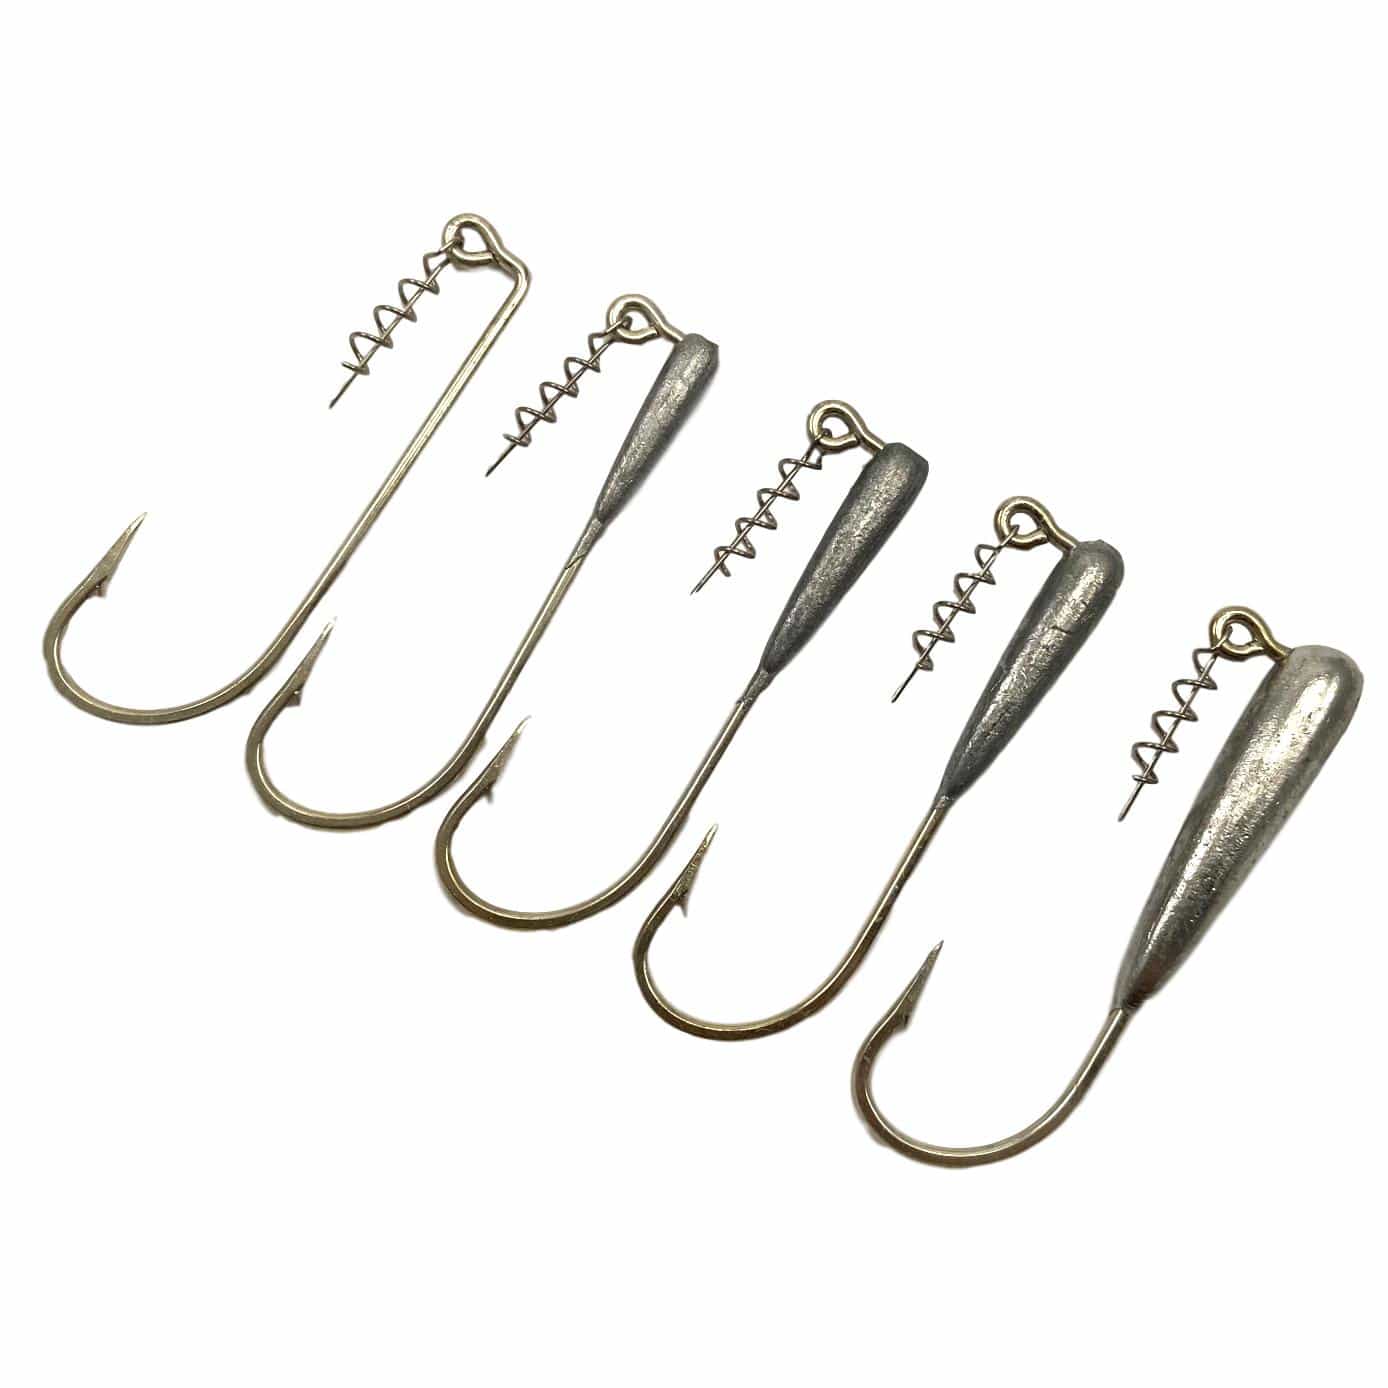 Worm hooks – Gerry's Discount Tackle